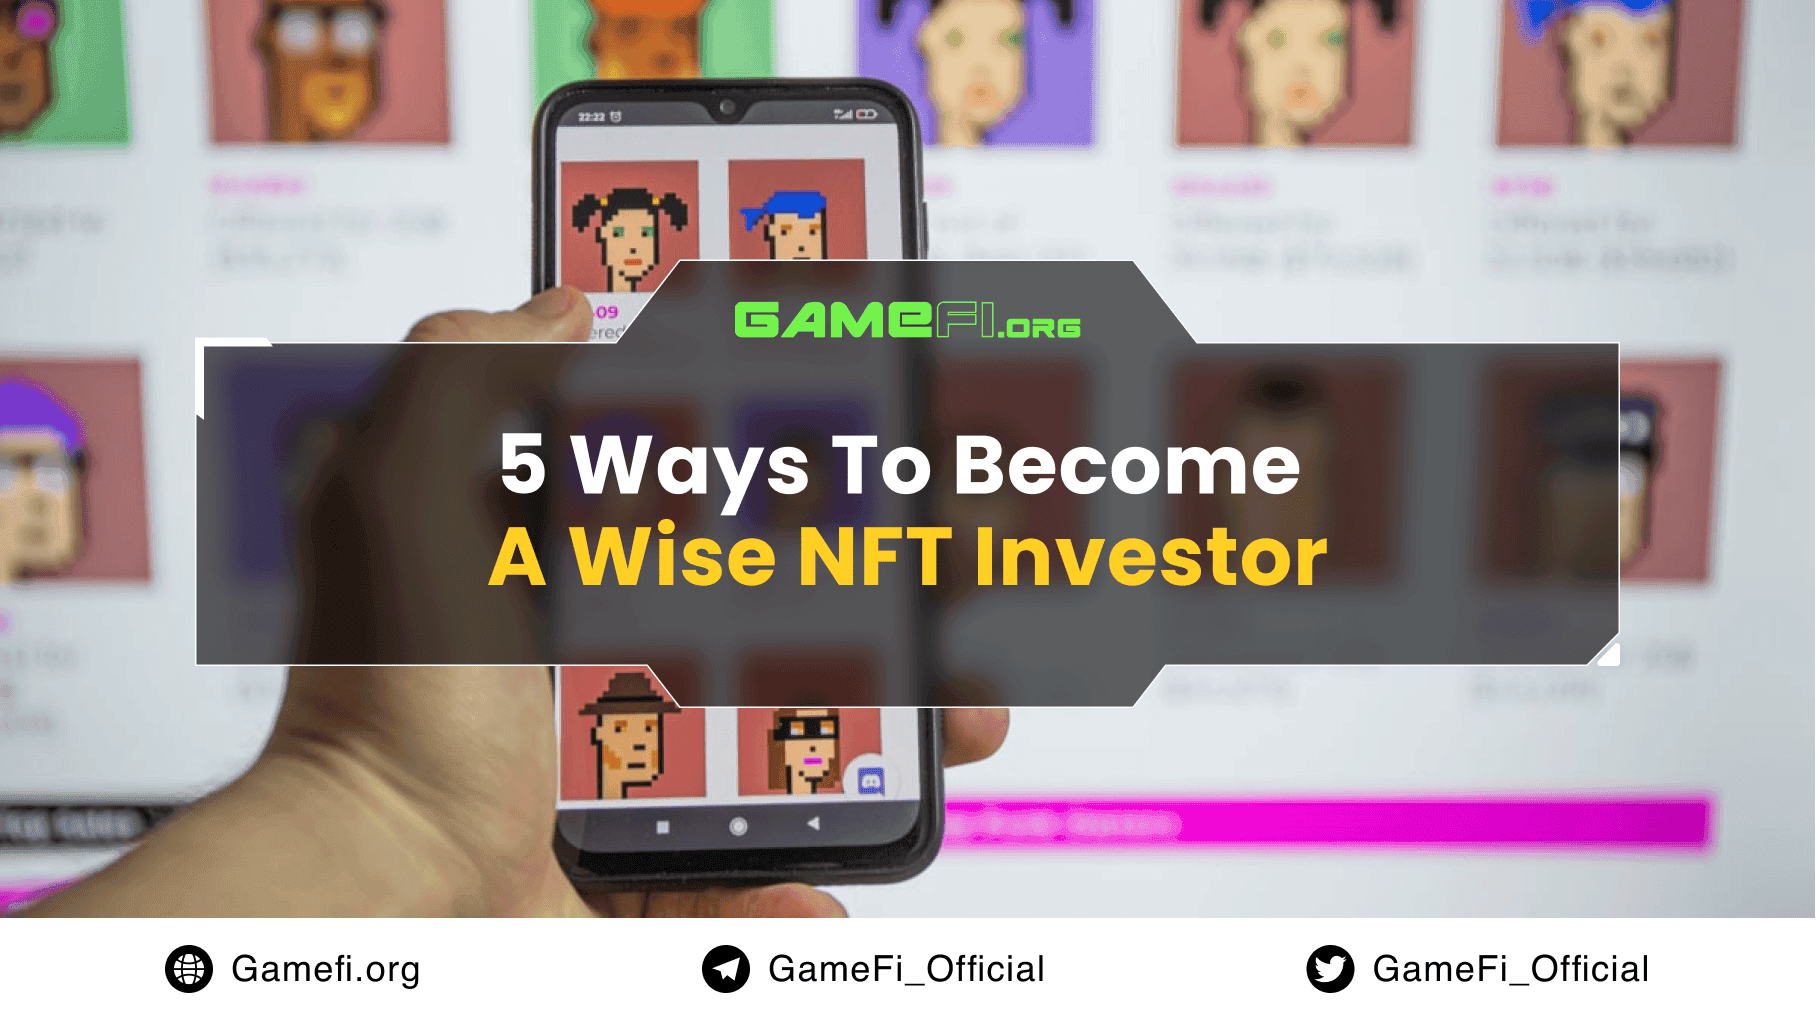 5 Ways To Become A Wise NFT Investor